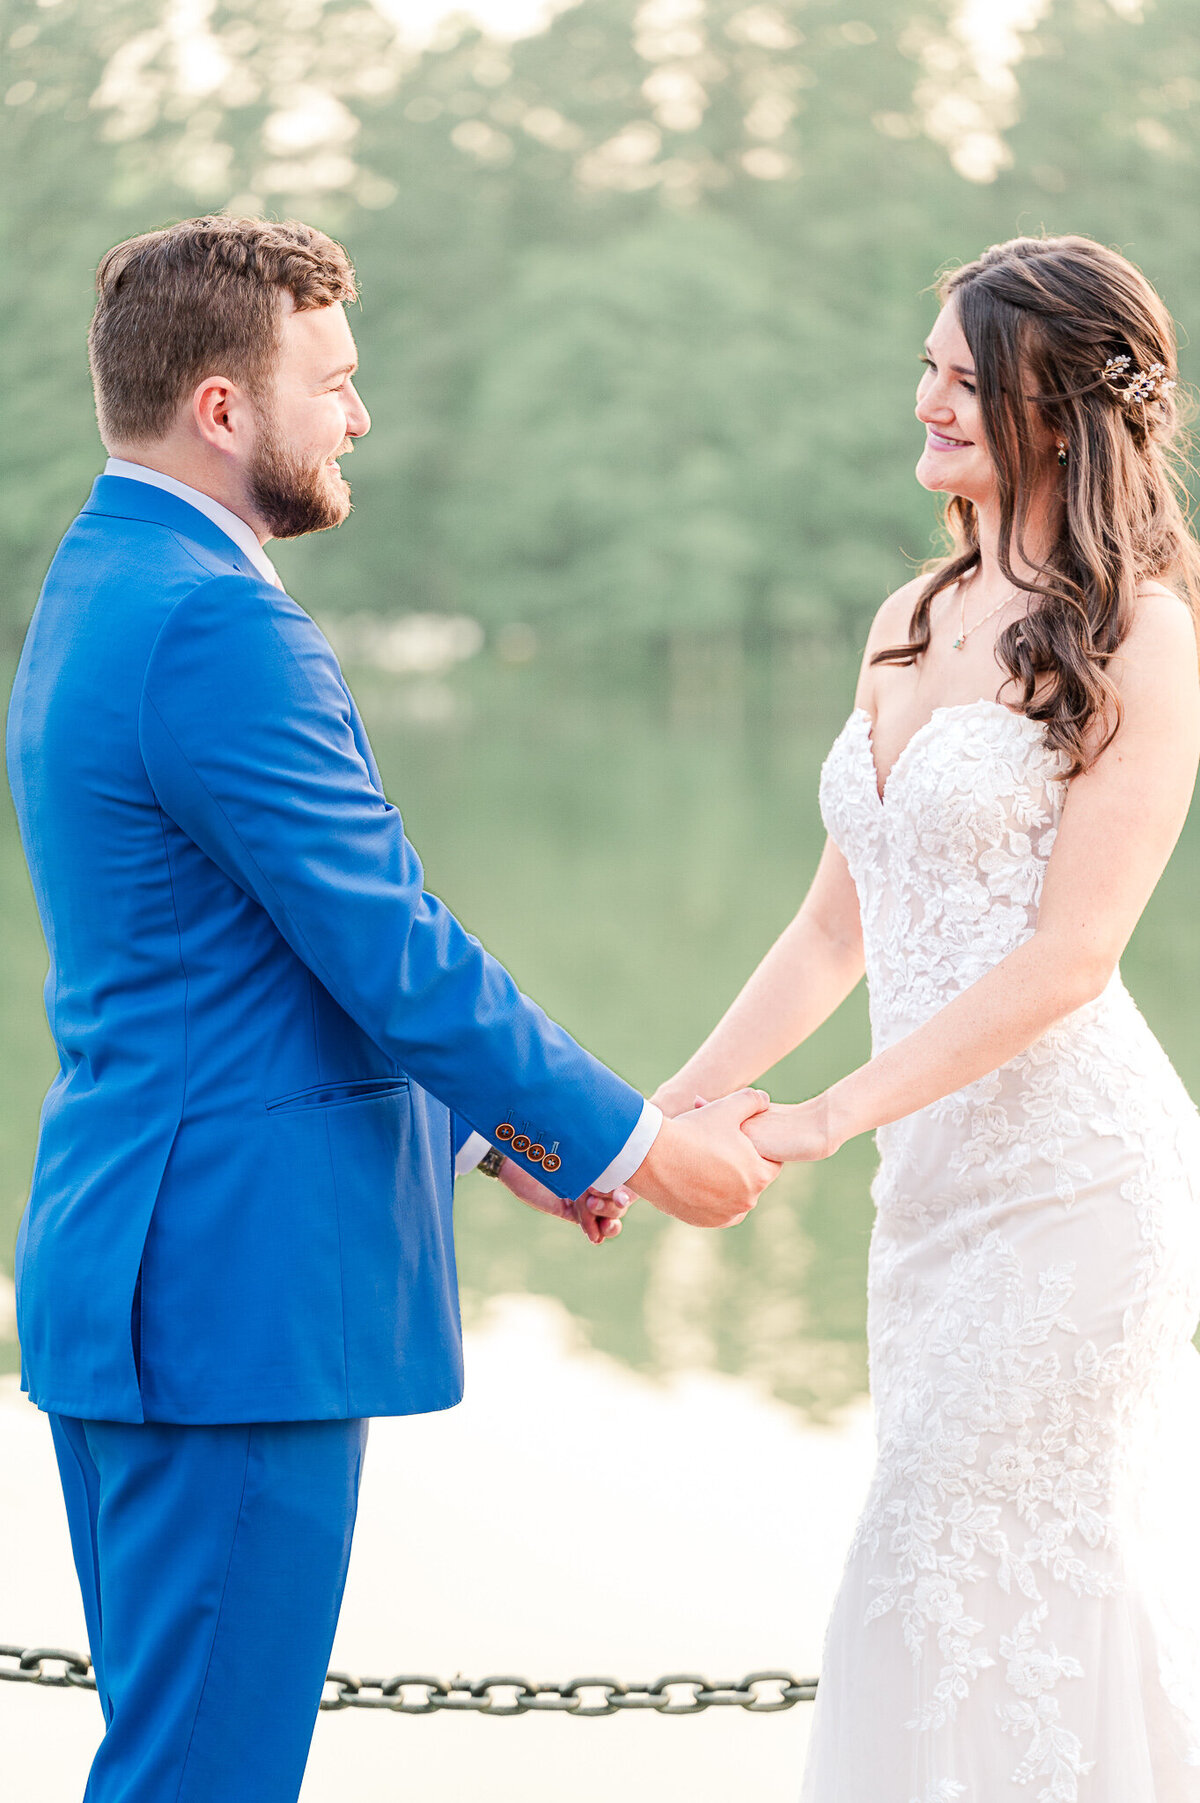 A bride and groom holding hands at sunset at the Pavilion at the Angus Barn by JoLynn Photography, a North Carolina wedding photographer